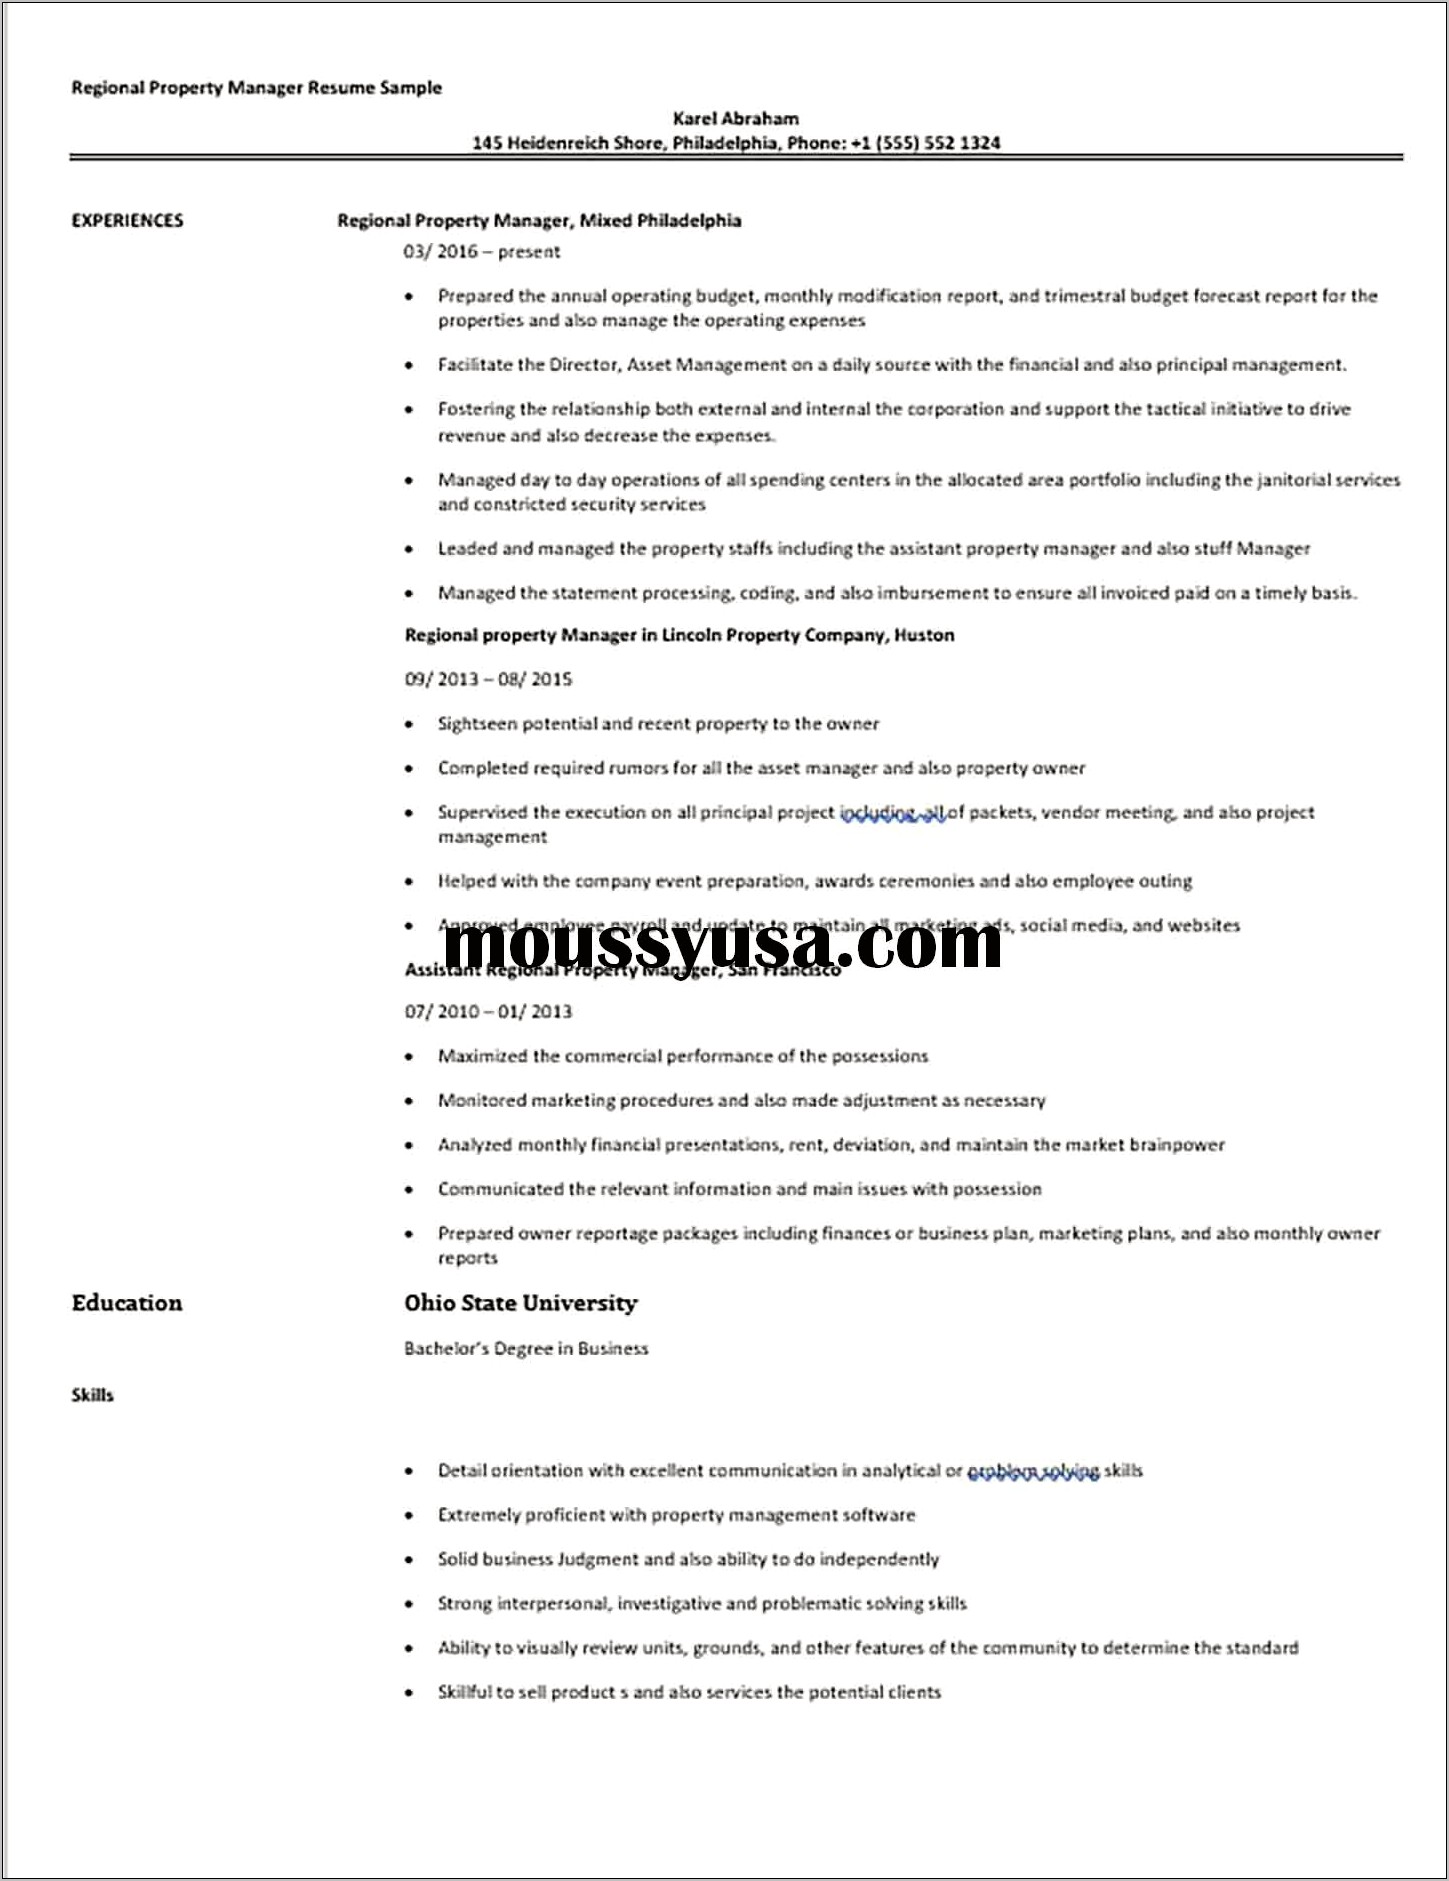 Regional Property Manager Resume Template